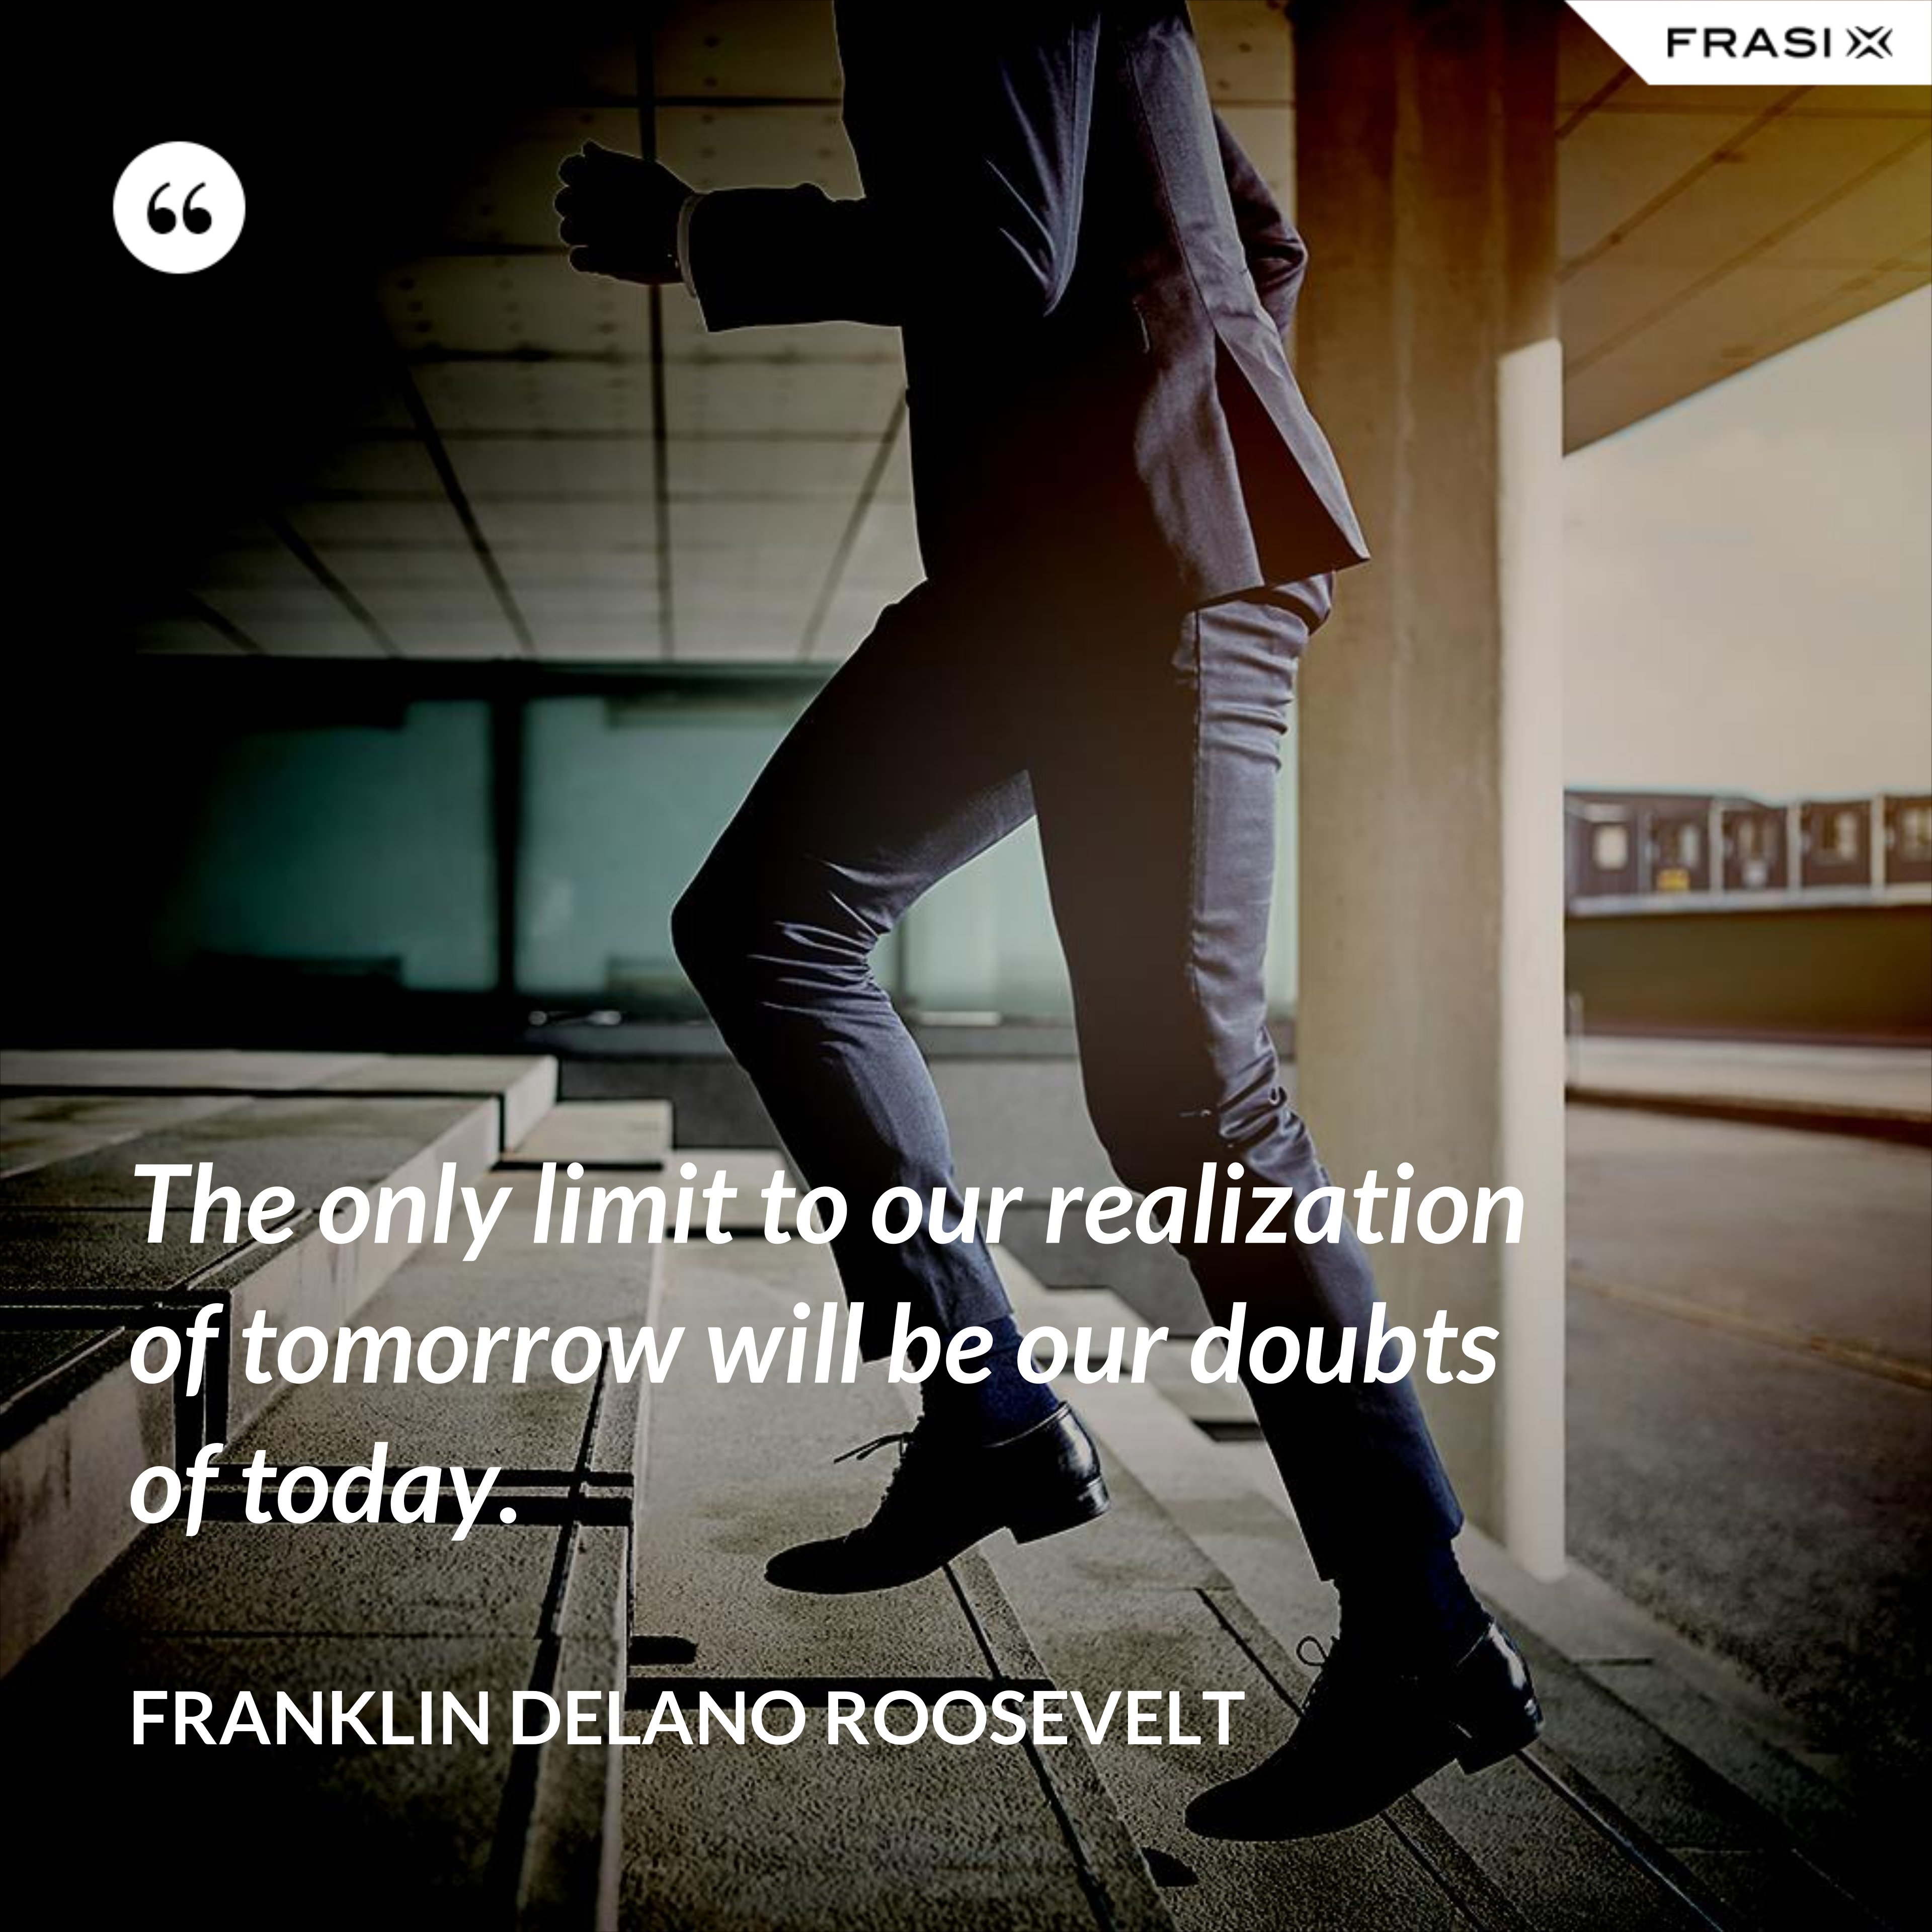 The only limit to our realization of tomorrow will be our doubts of today. - Franklin Delano Roosevelt